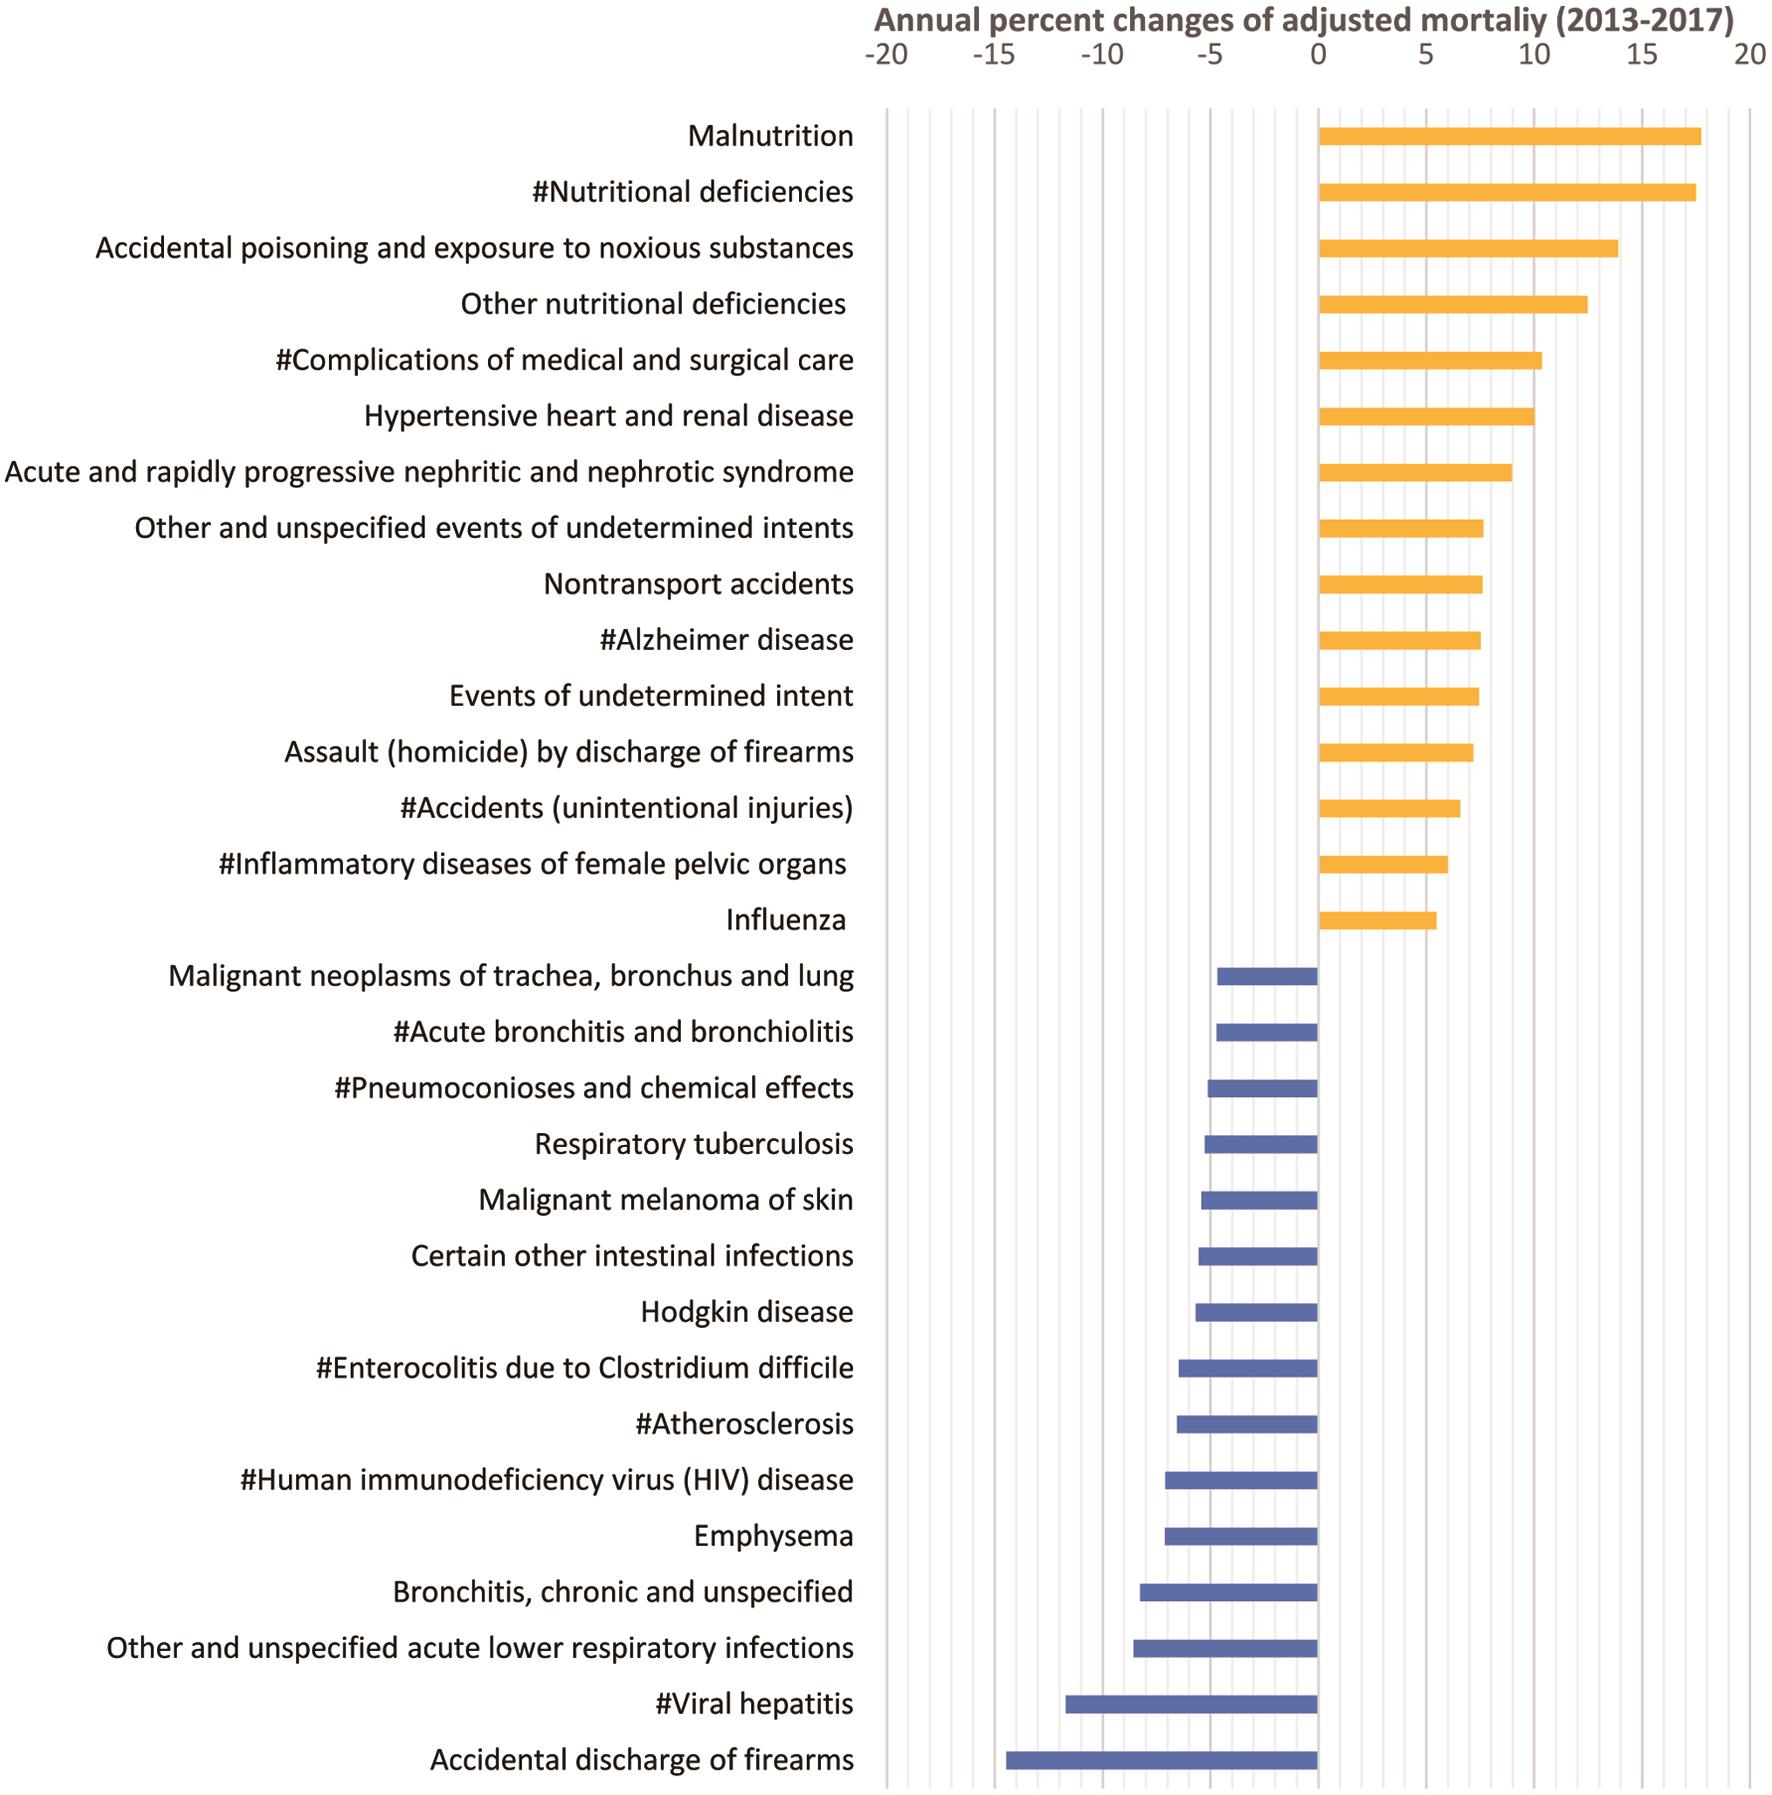 The top 15 underlying causes of deaths for the fastest increasing and decreasing trends in sex- and race-adjusted and age-standardized mortality among adults in the U.S., 2013–2017.